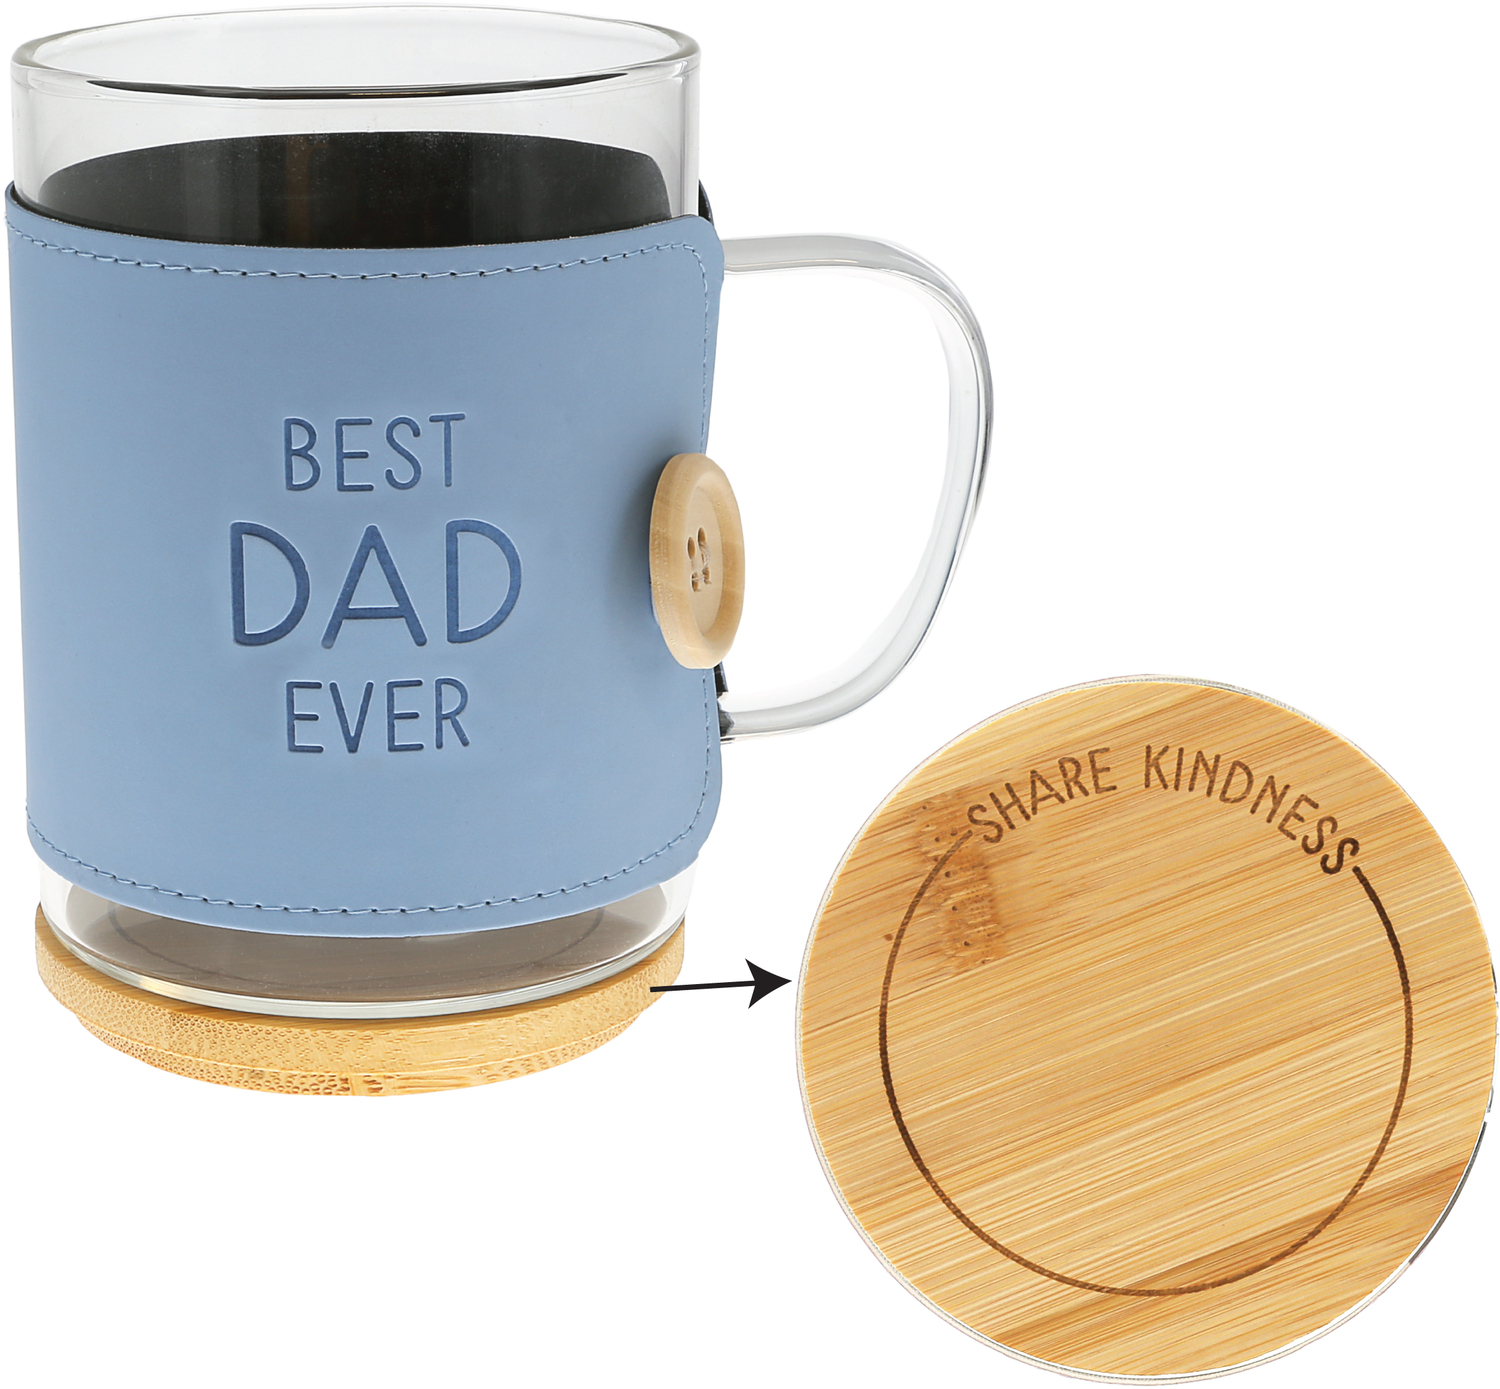 Dad by Wrapped in Kindness - Dad - 16 oz Wrapped Glass Mug with Coaster Lid